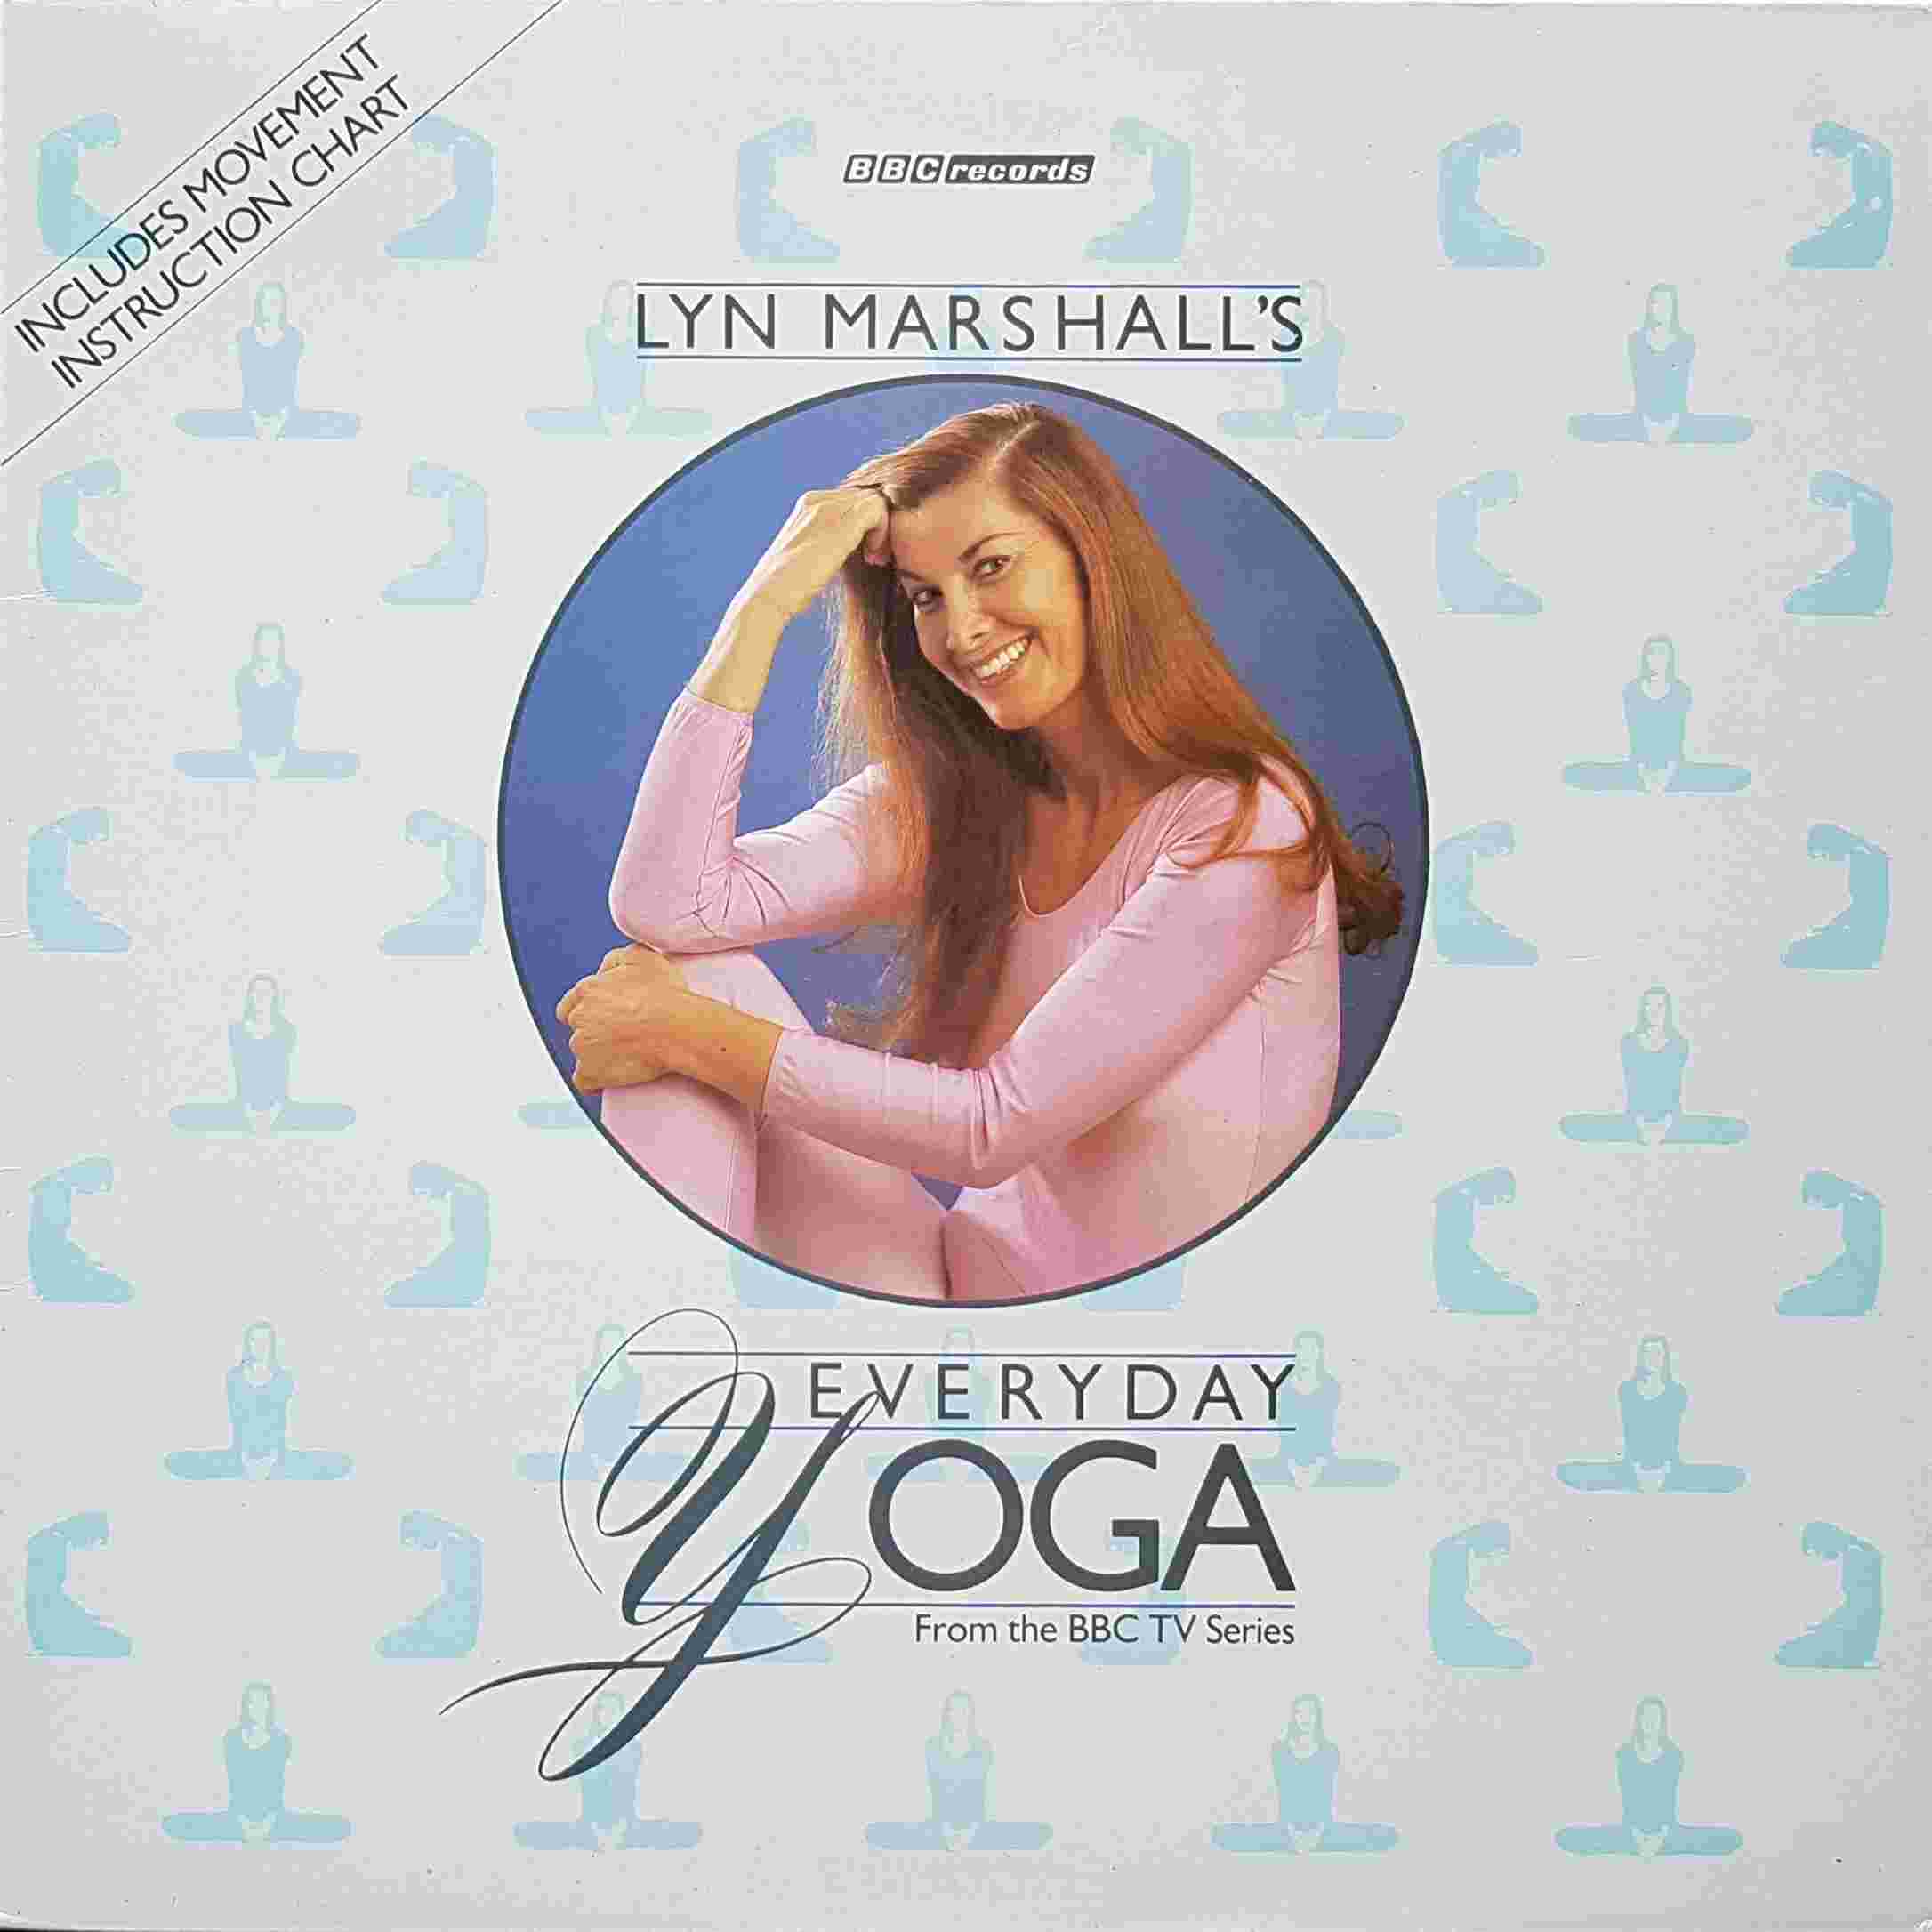 Picture of REH 461 Lyn marshall's everyday yoga by artist Lyn marshall from the BBC records and Tapes library